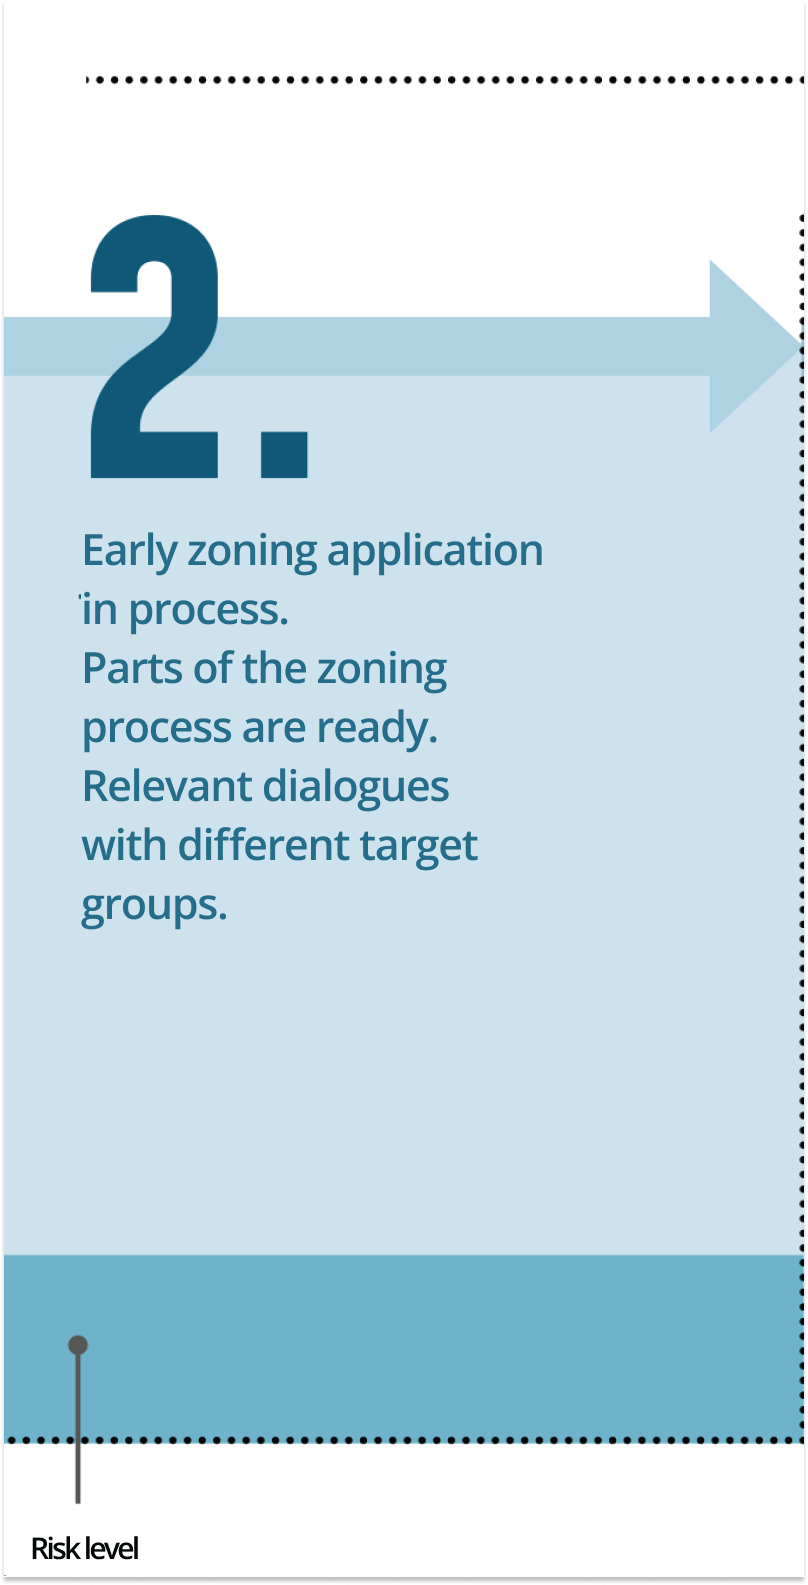 2. Early zoning application in process. Parts of the zoning process are ready. Relevant dialogues with different target groups.